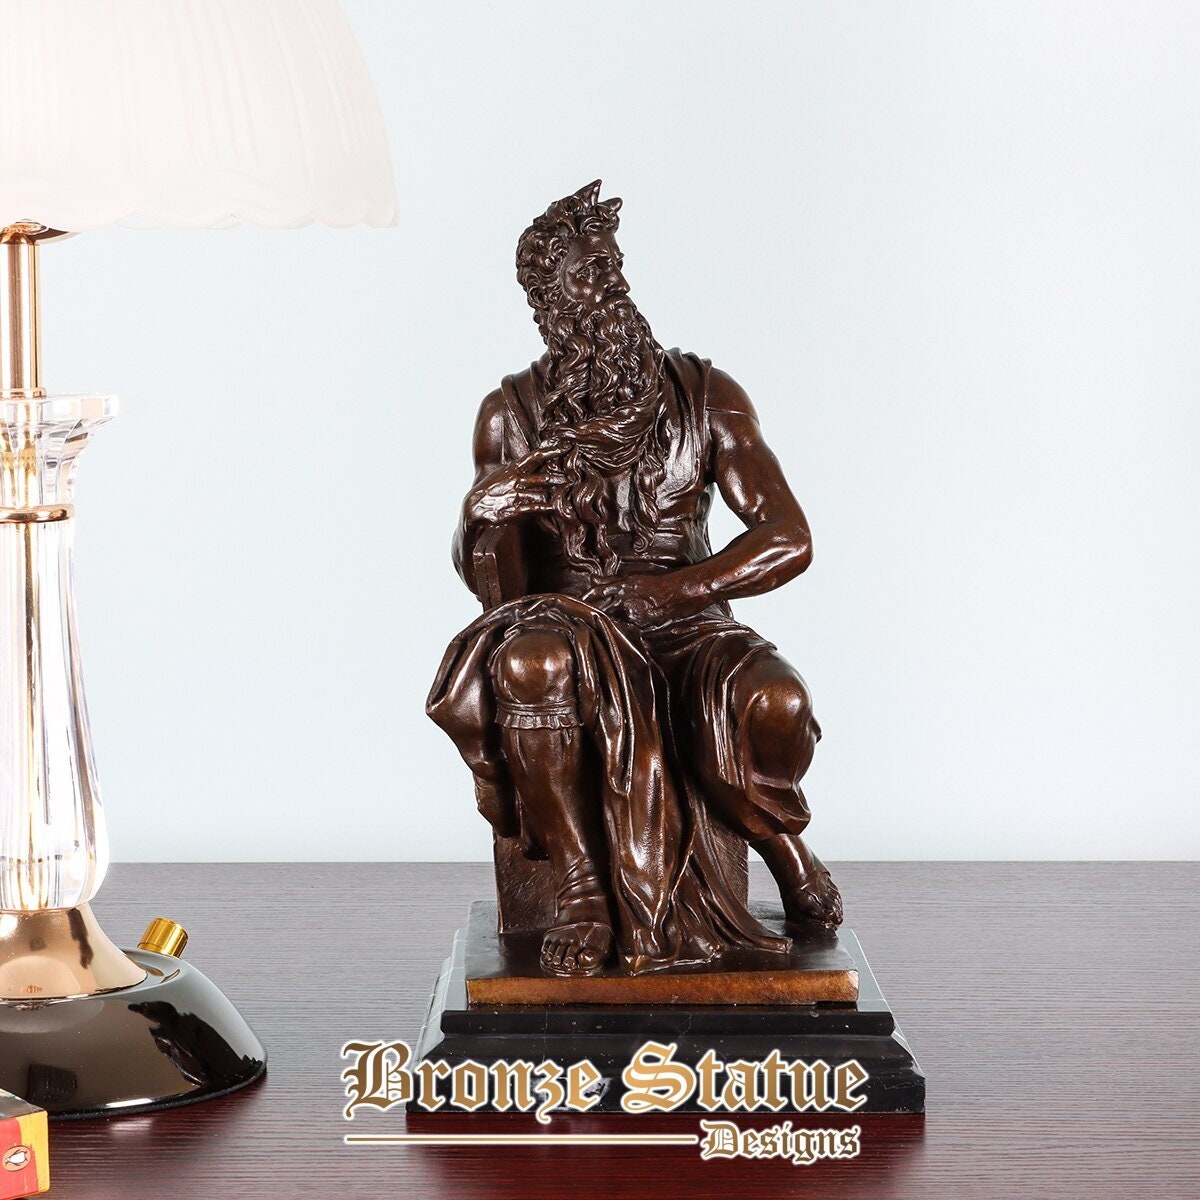 Moses statue by michelangelo bronze replica sculpture famous art western collectible figurine home office decor